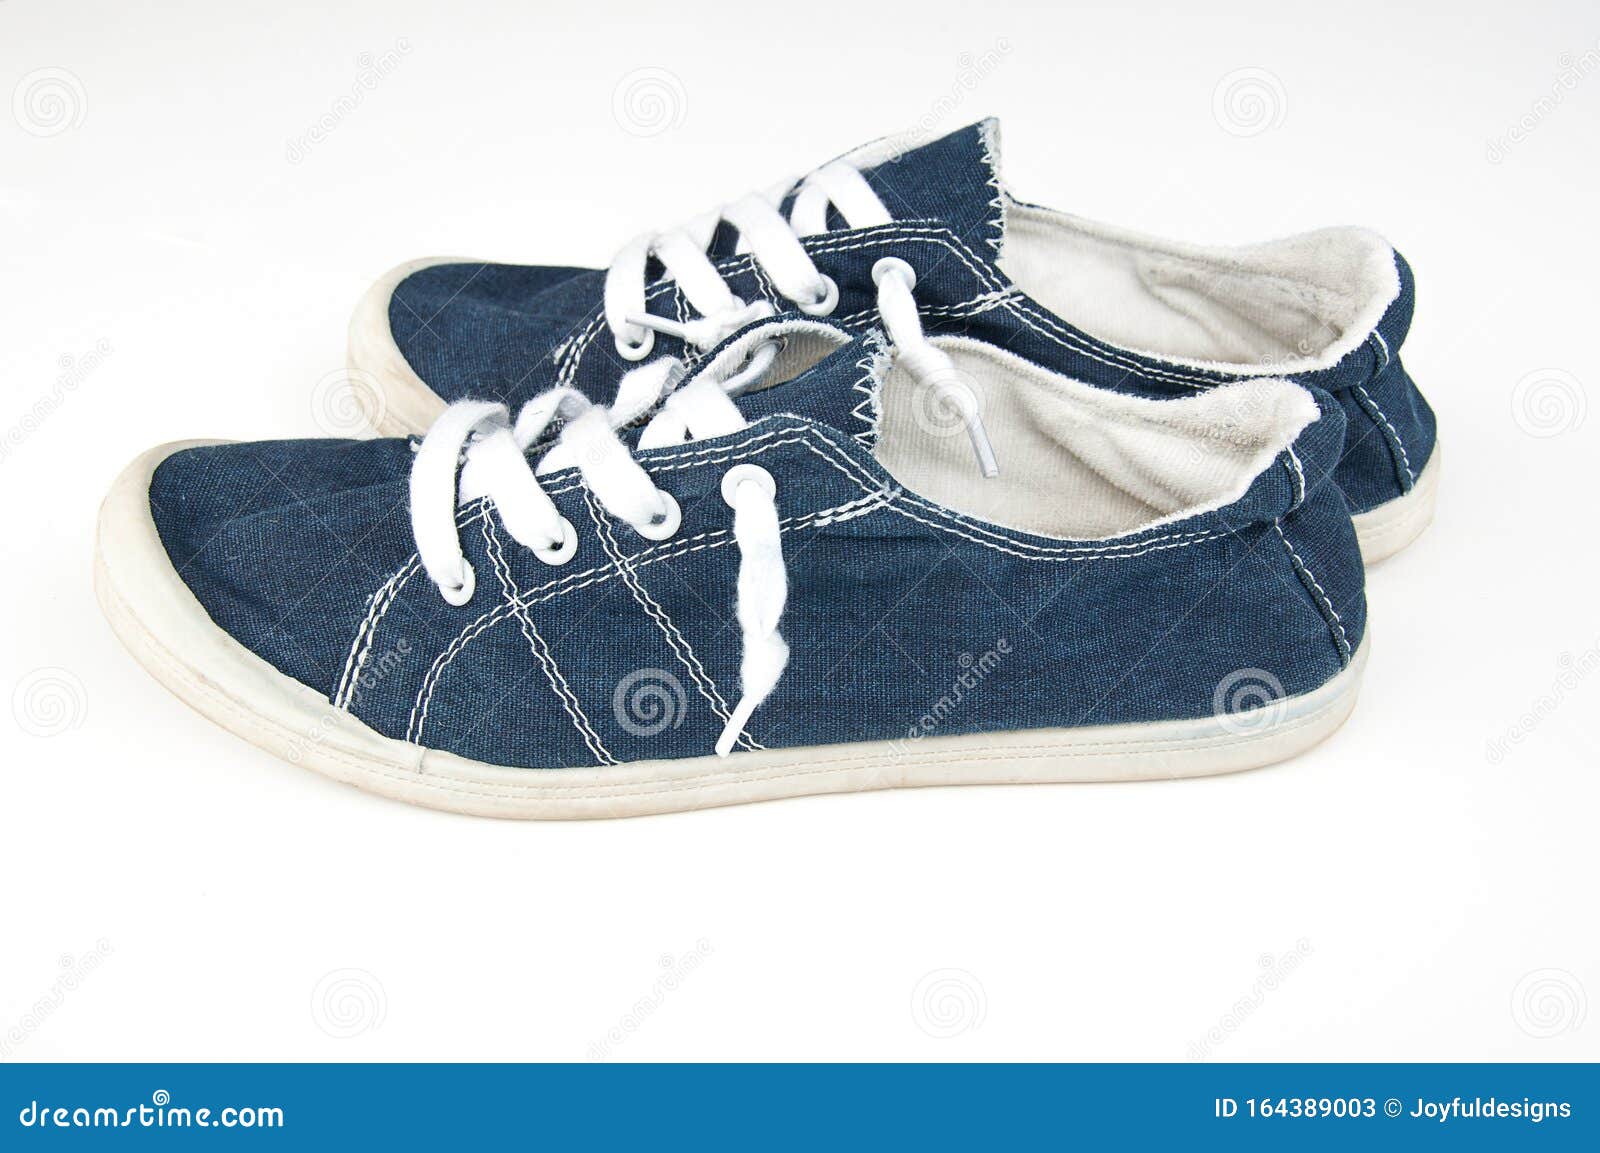 Casual Canvas Blue Shoes Isolated on Light Background Stock Image ...